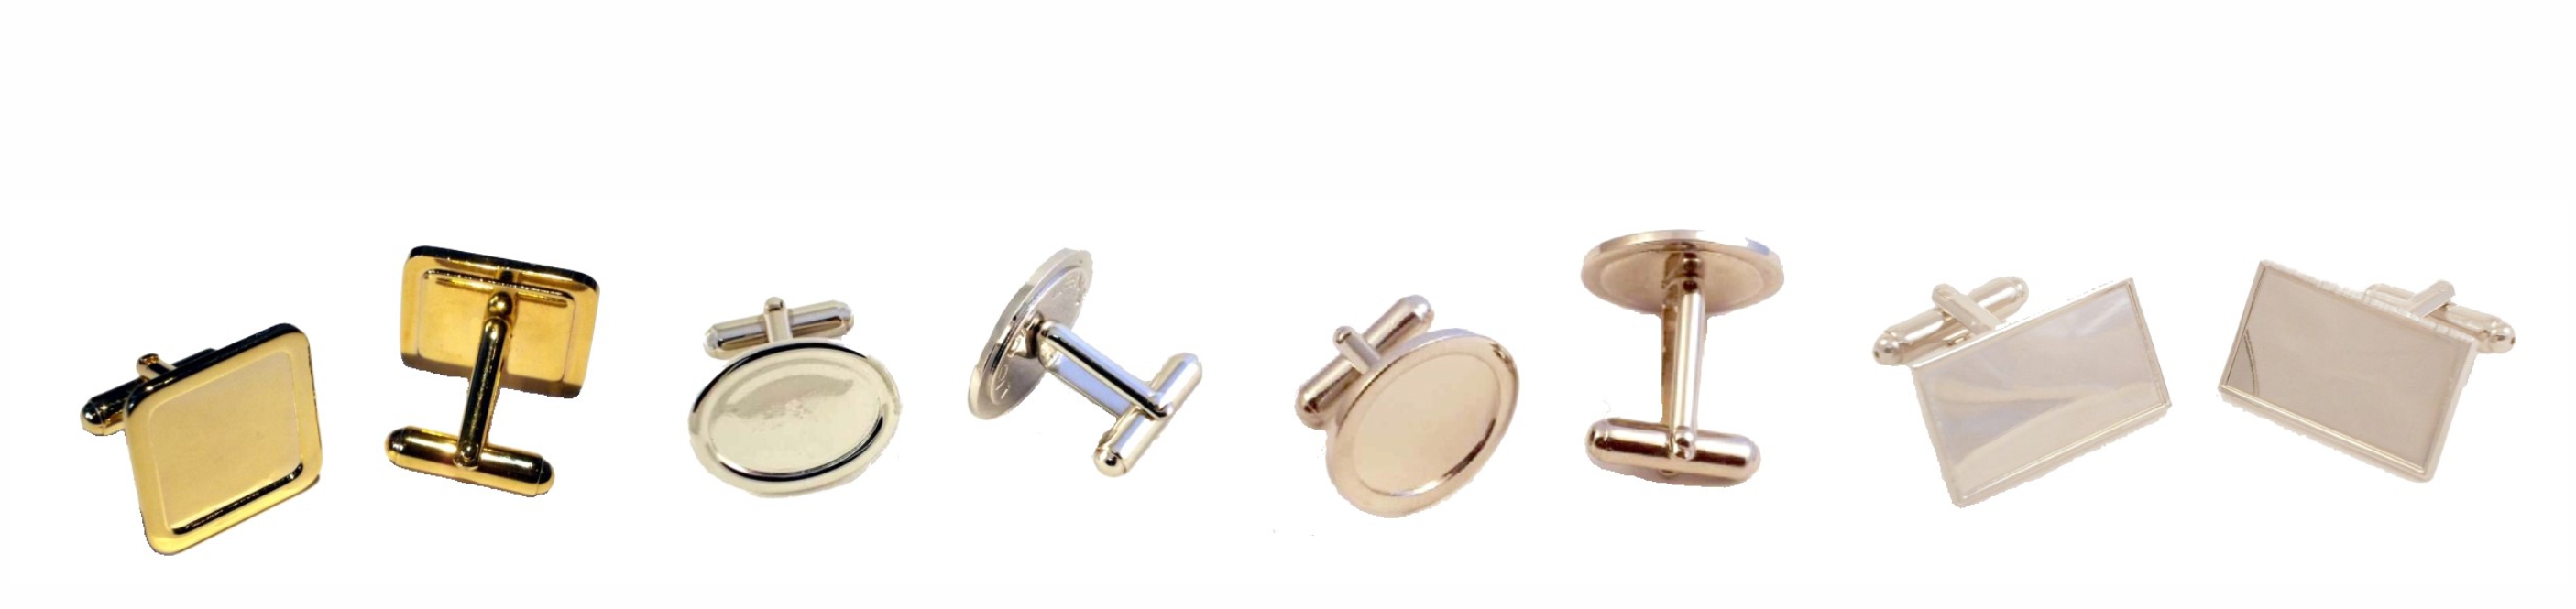 Cufflink Blanks with Printed Domes.